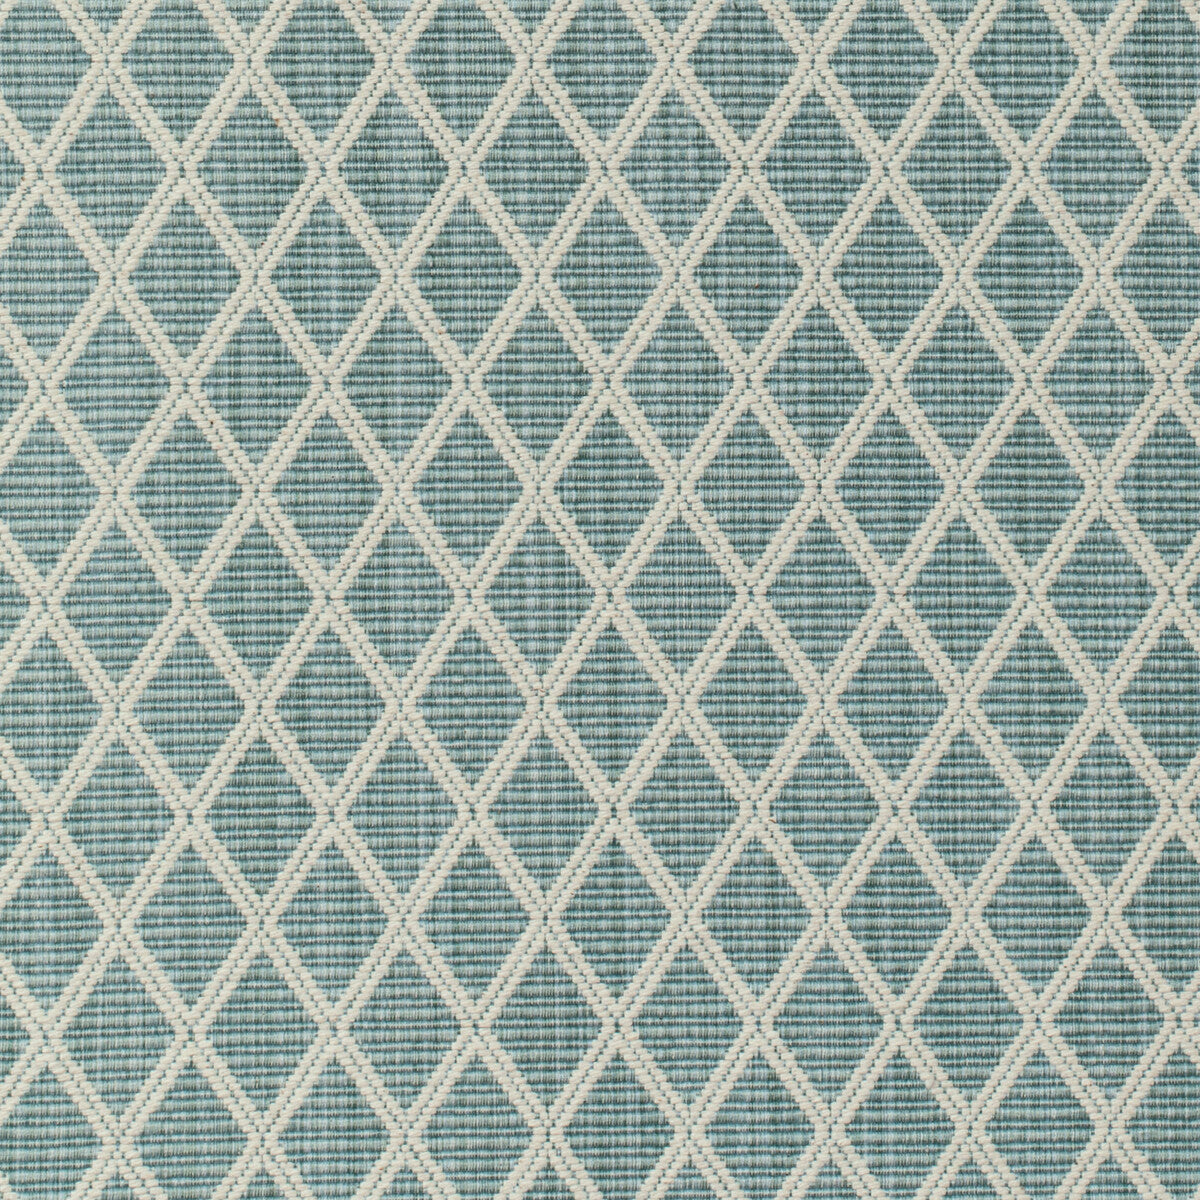 Cancale Woven fabric in aqua color - pattern 8020109.113.0 - by Brunschwig &amp; Fils in the Granville Weaves collection